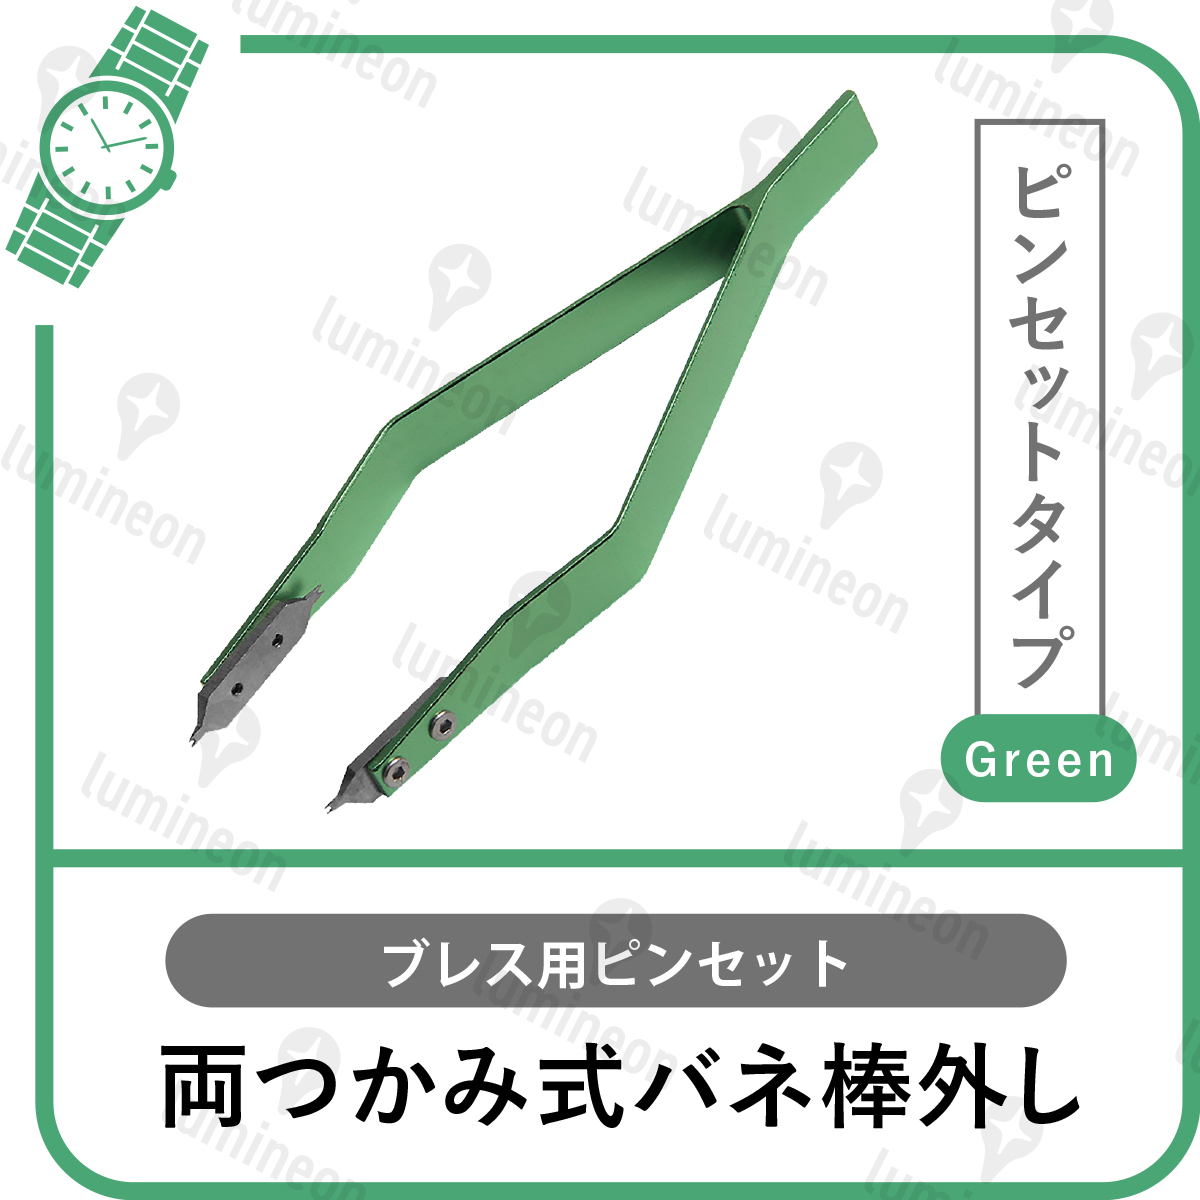  spring stick removing high class high precision green green color both grip both .. type wristwatch spring stick remove breath for tweezers Rolex Omega etc. correspondence g026e 3